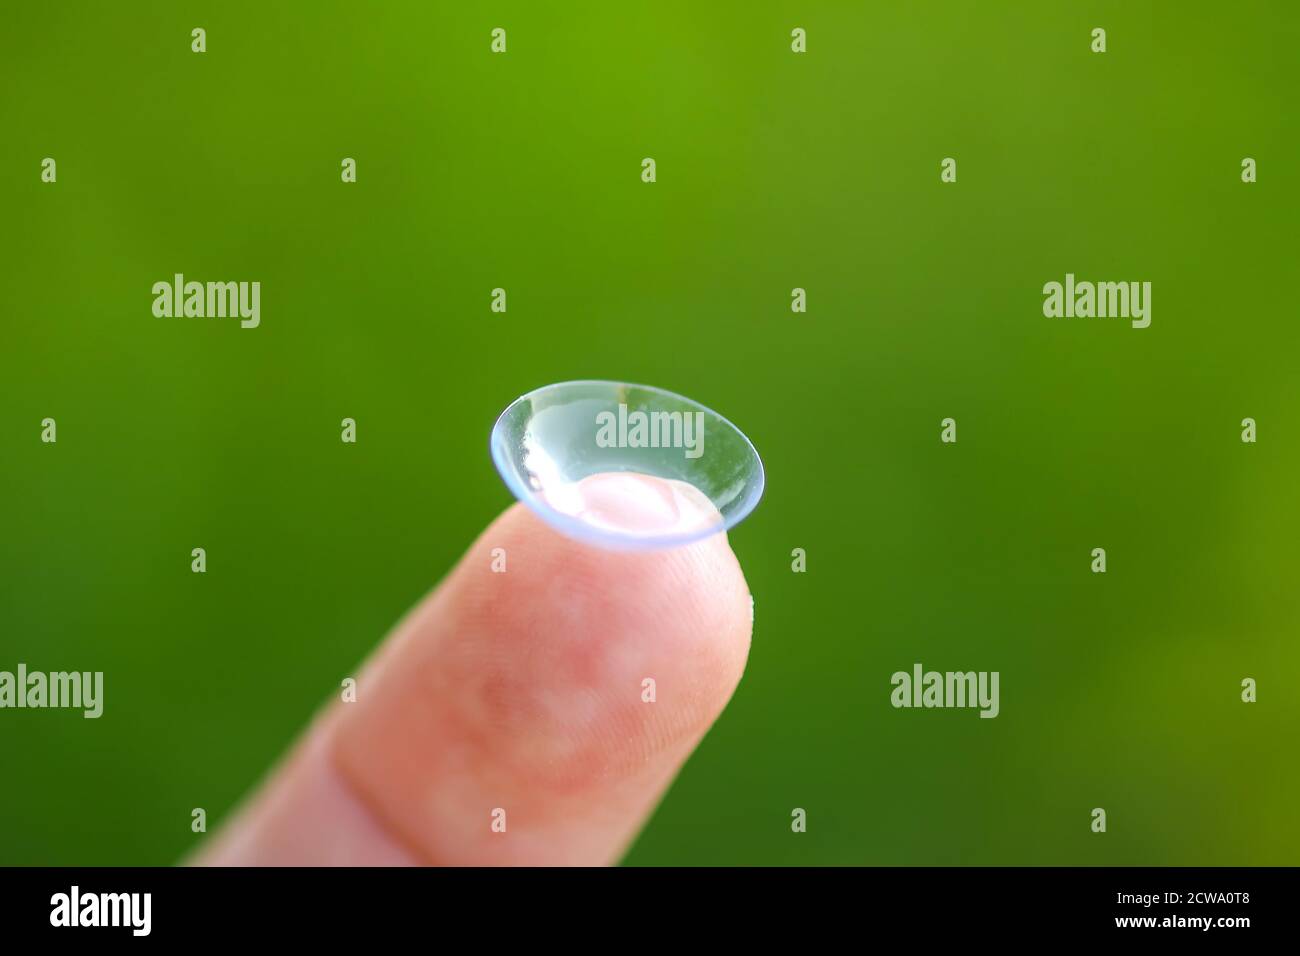 Transparent contact lens on finger tip on blurred green summer nature background. Stock Photo